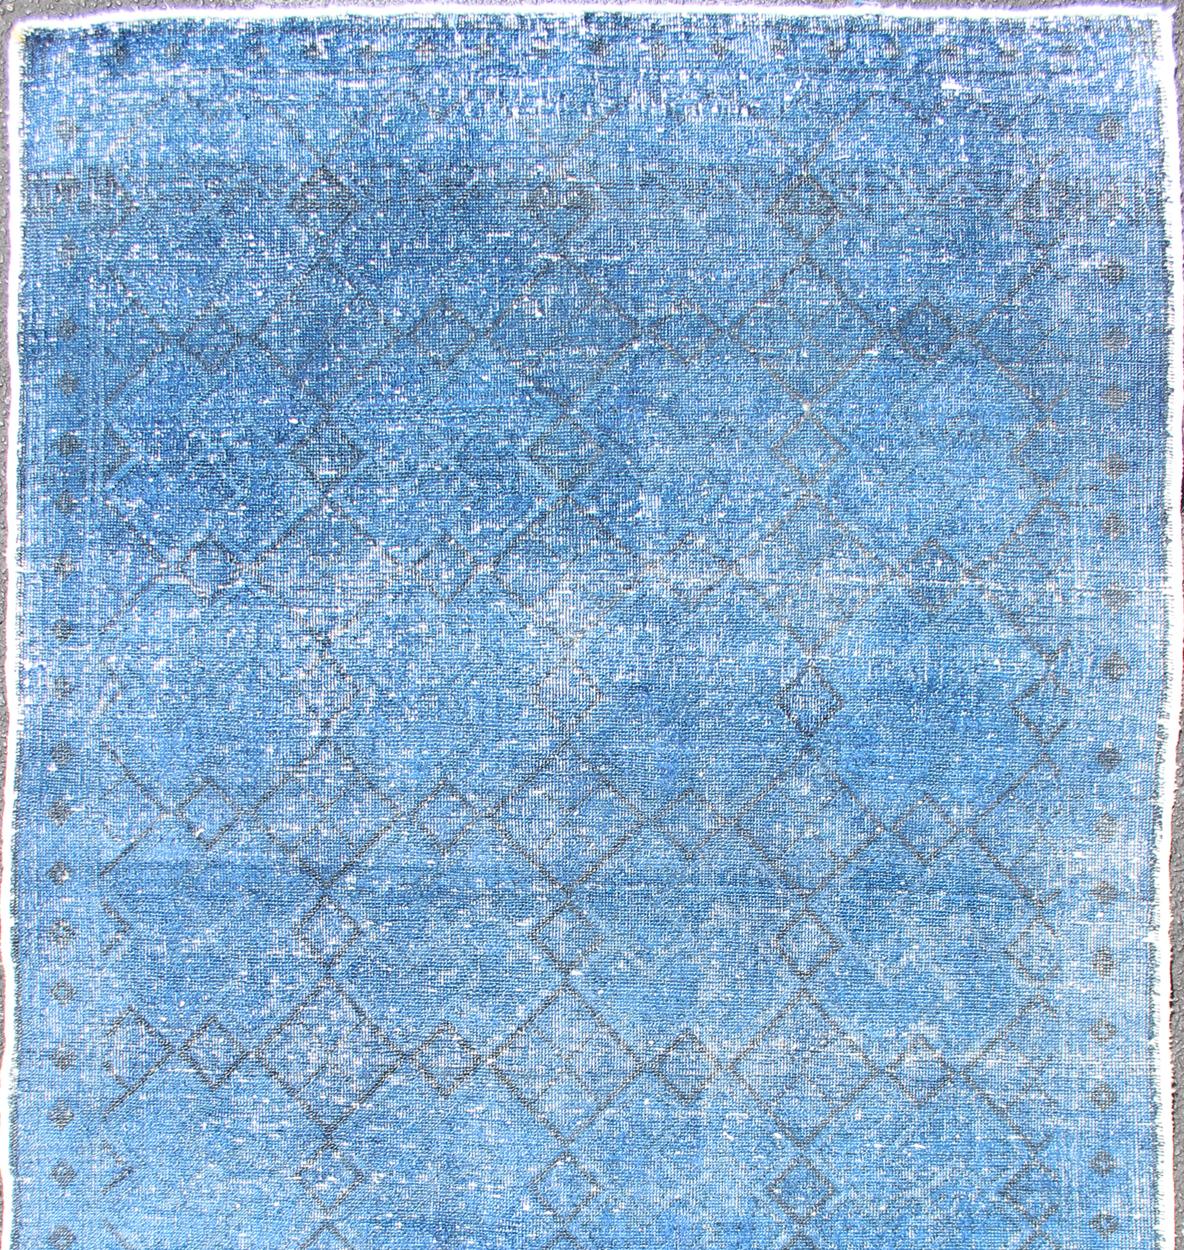 Fine weave and old blue and black Turkish vintage Konya rug, later overdyed in blue to elevate the classical design/composition, rug TU-MTU-3463, country of origin / type: Turkey / Konya, circa 1950, antique Turkish

This vintage Turkish carpet